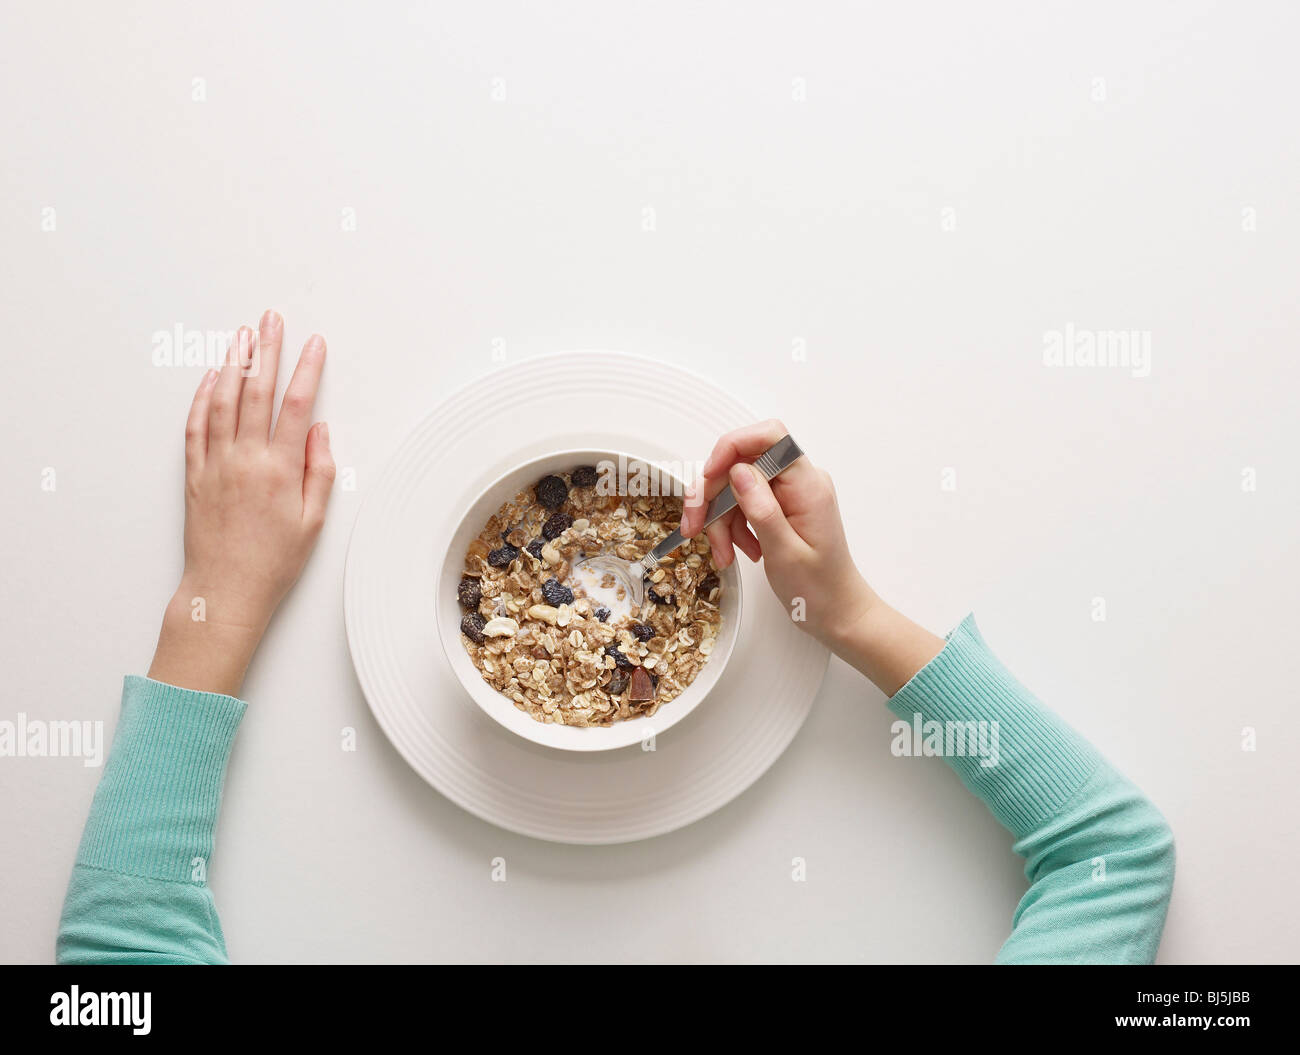 Hands by a bowl of cereal Stock Photo